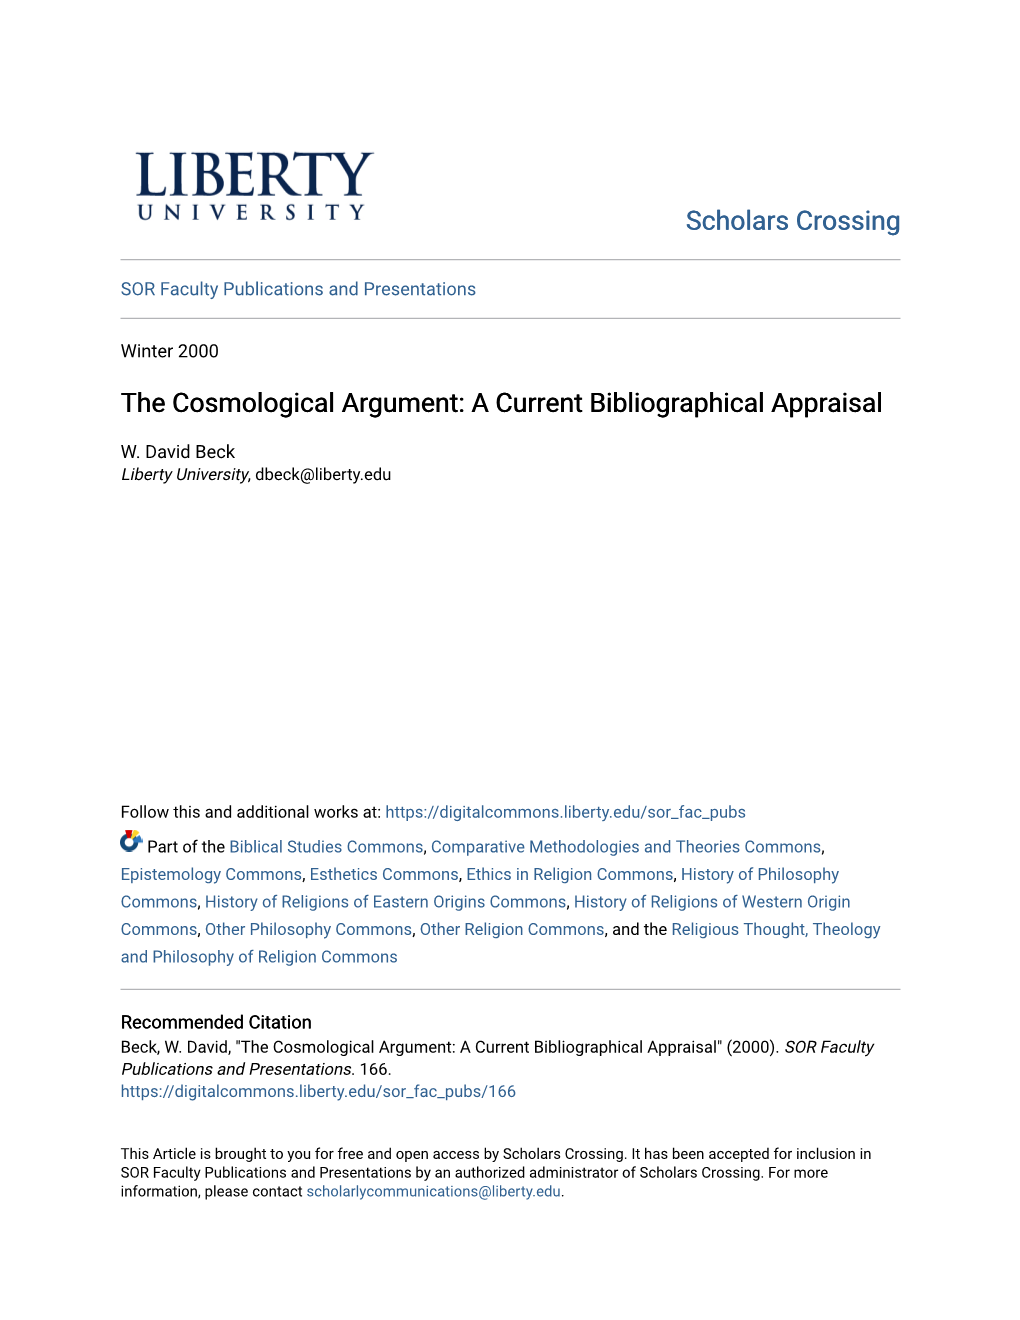 The Cosmological Argument: a Current Bibliographical Appraisal